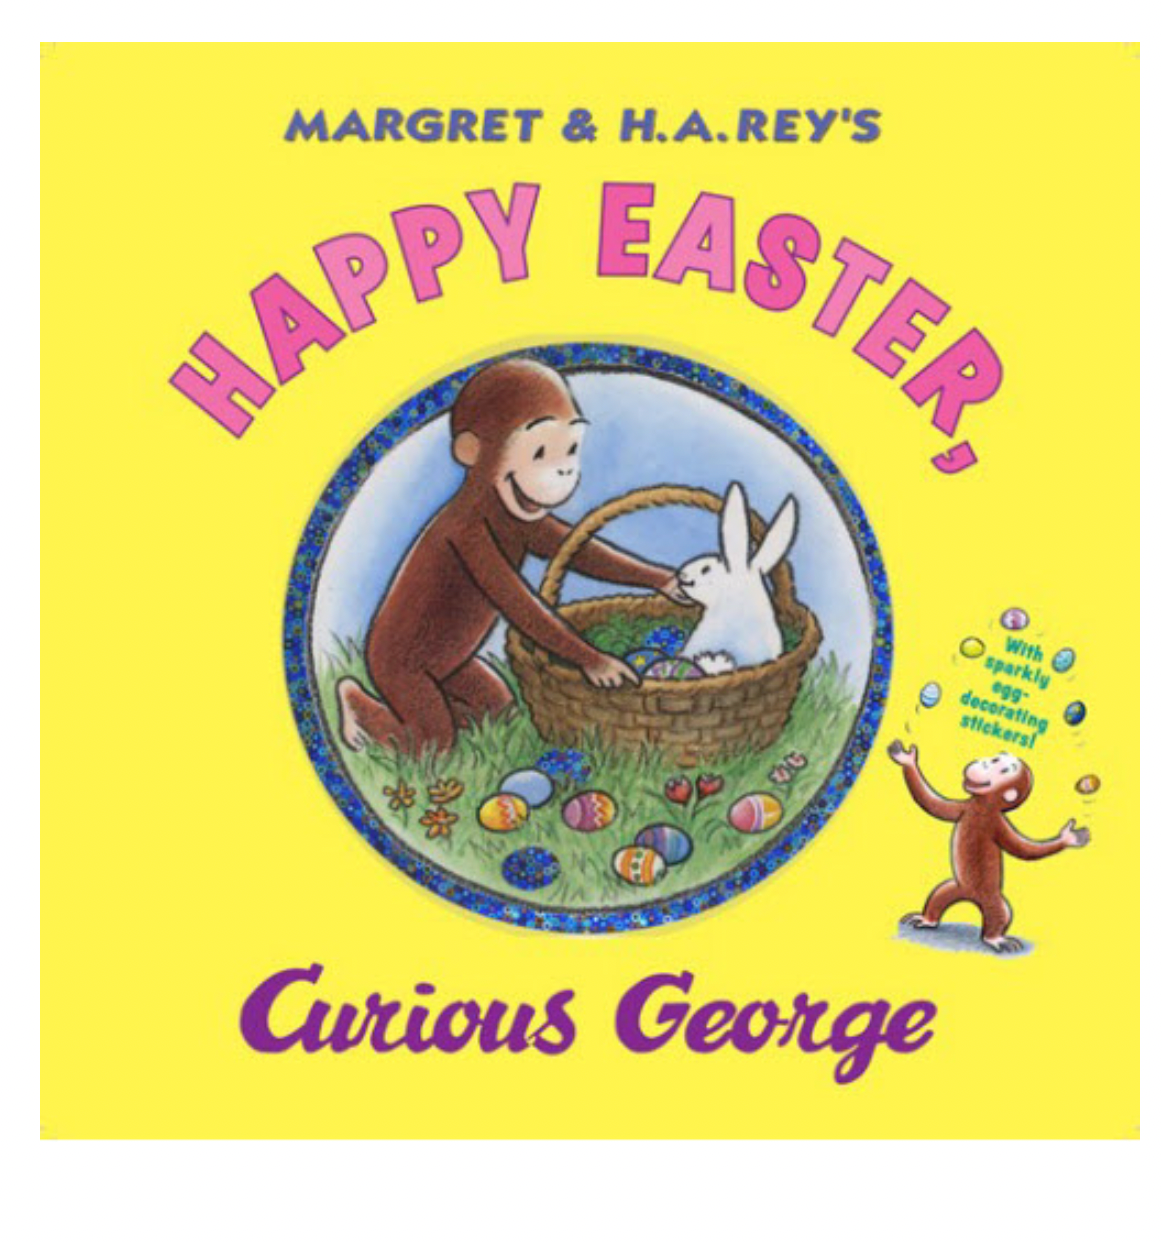 Happy Easter Curious George!